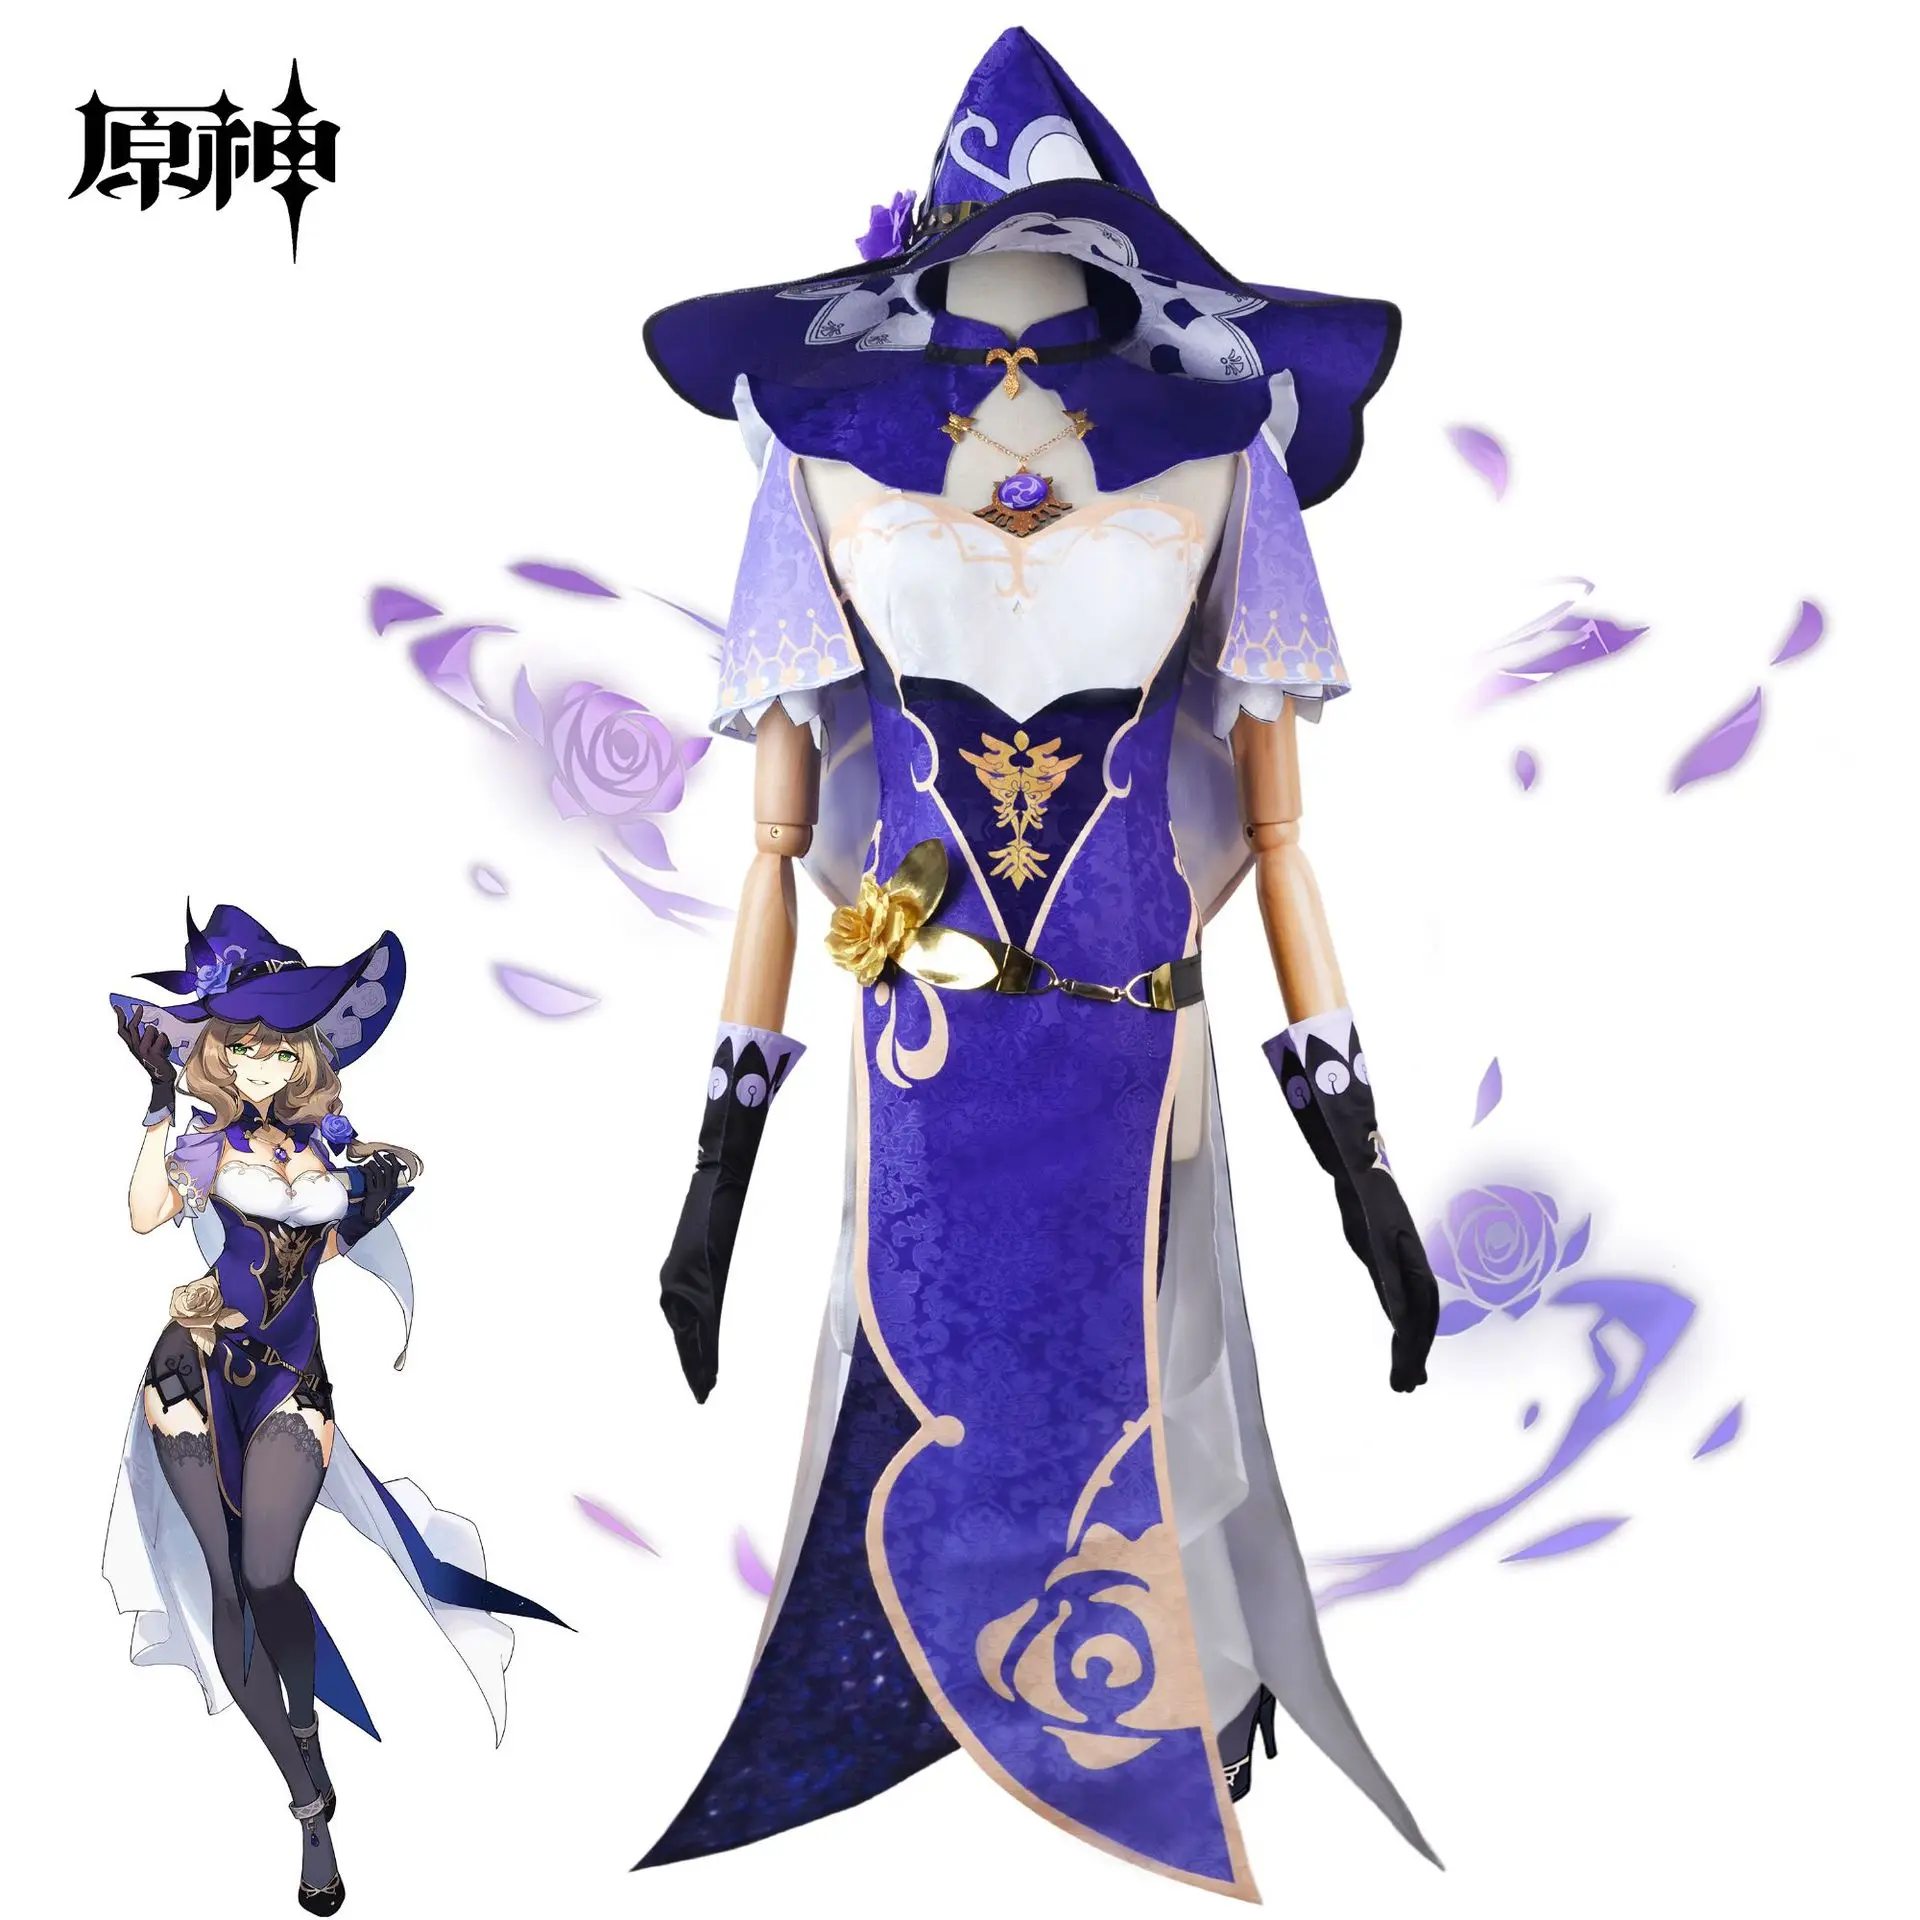 

Game Genshin Impact Halloween Outfits Lisa Minci Lisa Witch Cosplay Costume Include Dress Hat Stockings Wig Lisa Outfits XS-3XL